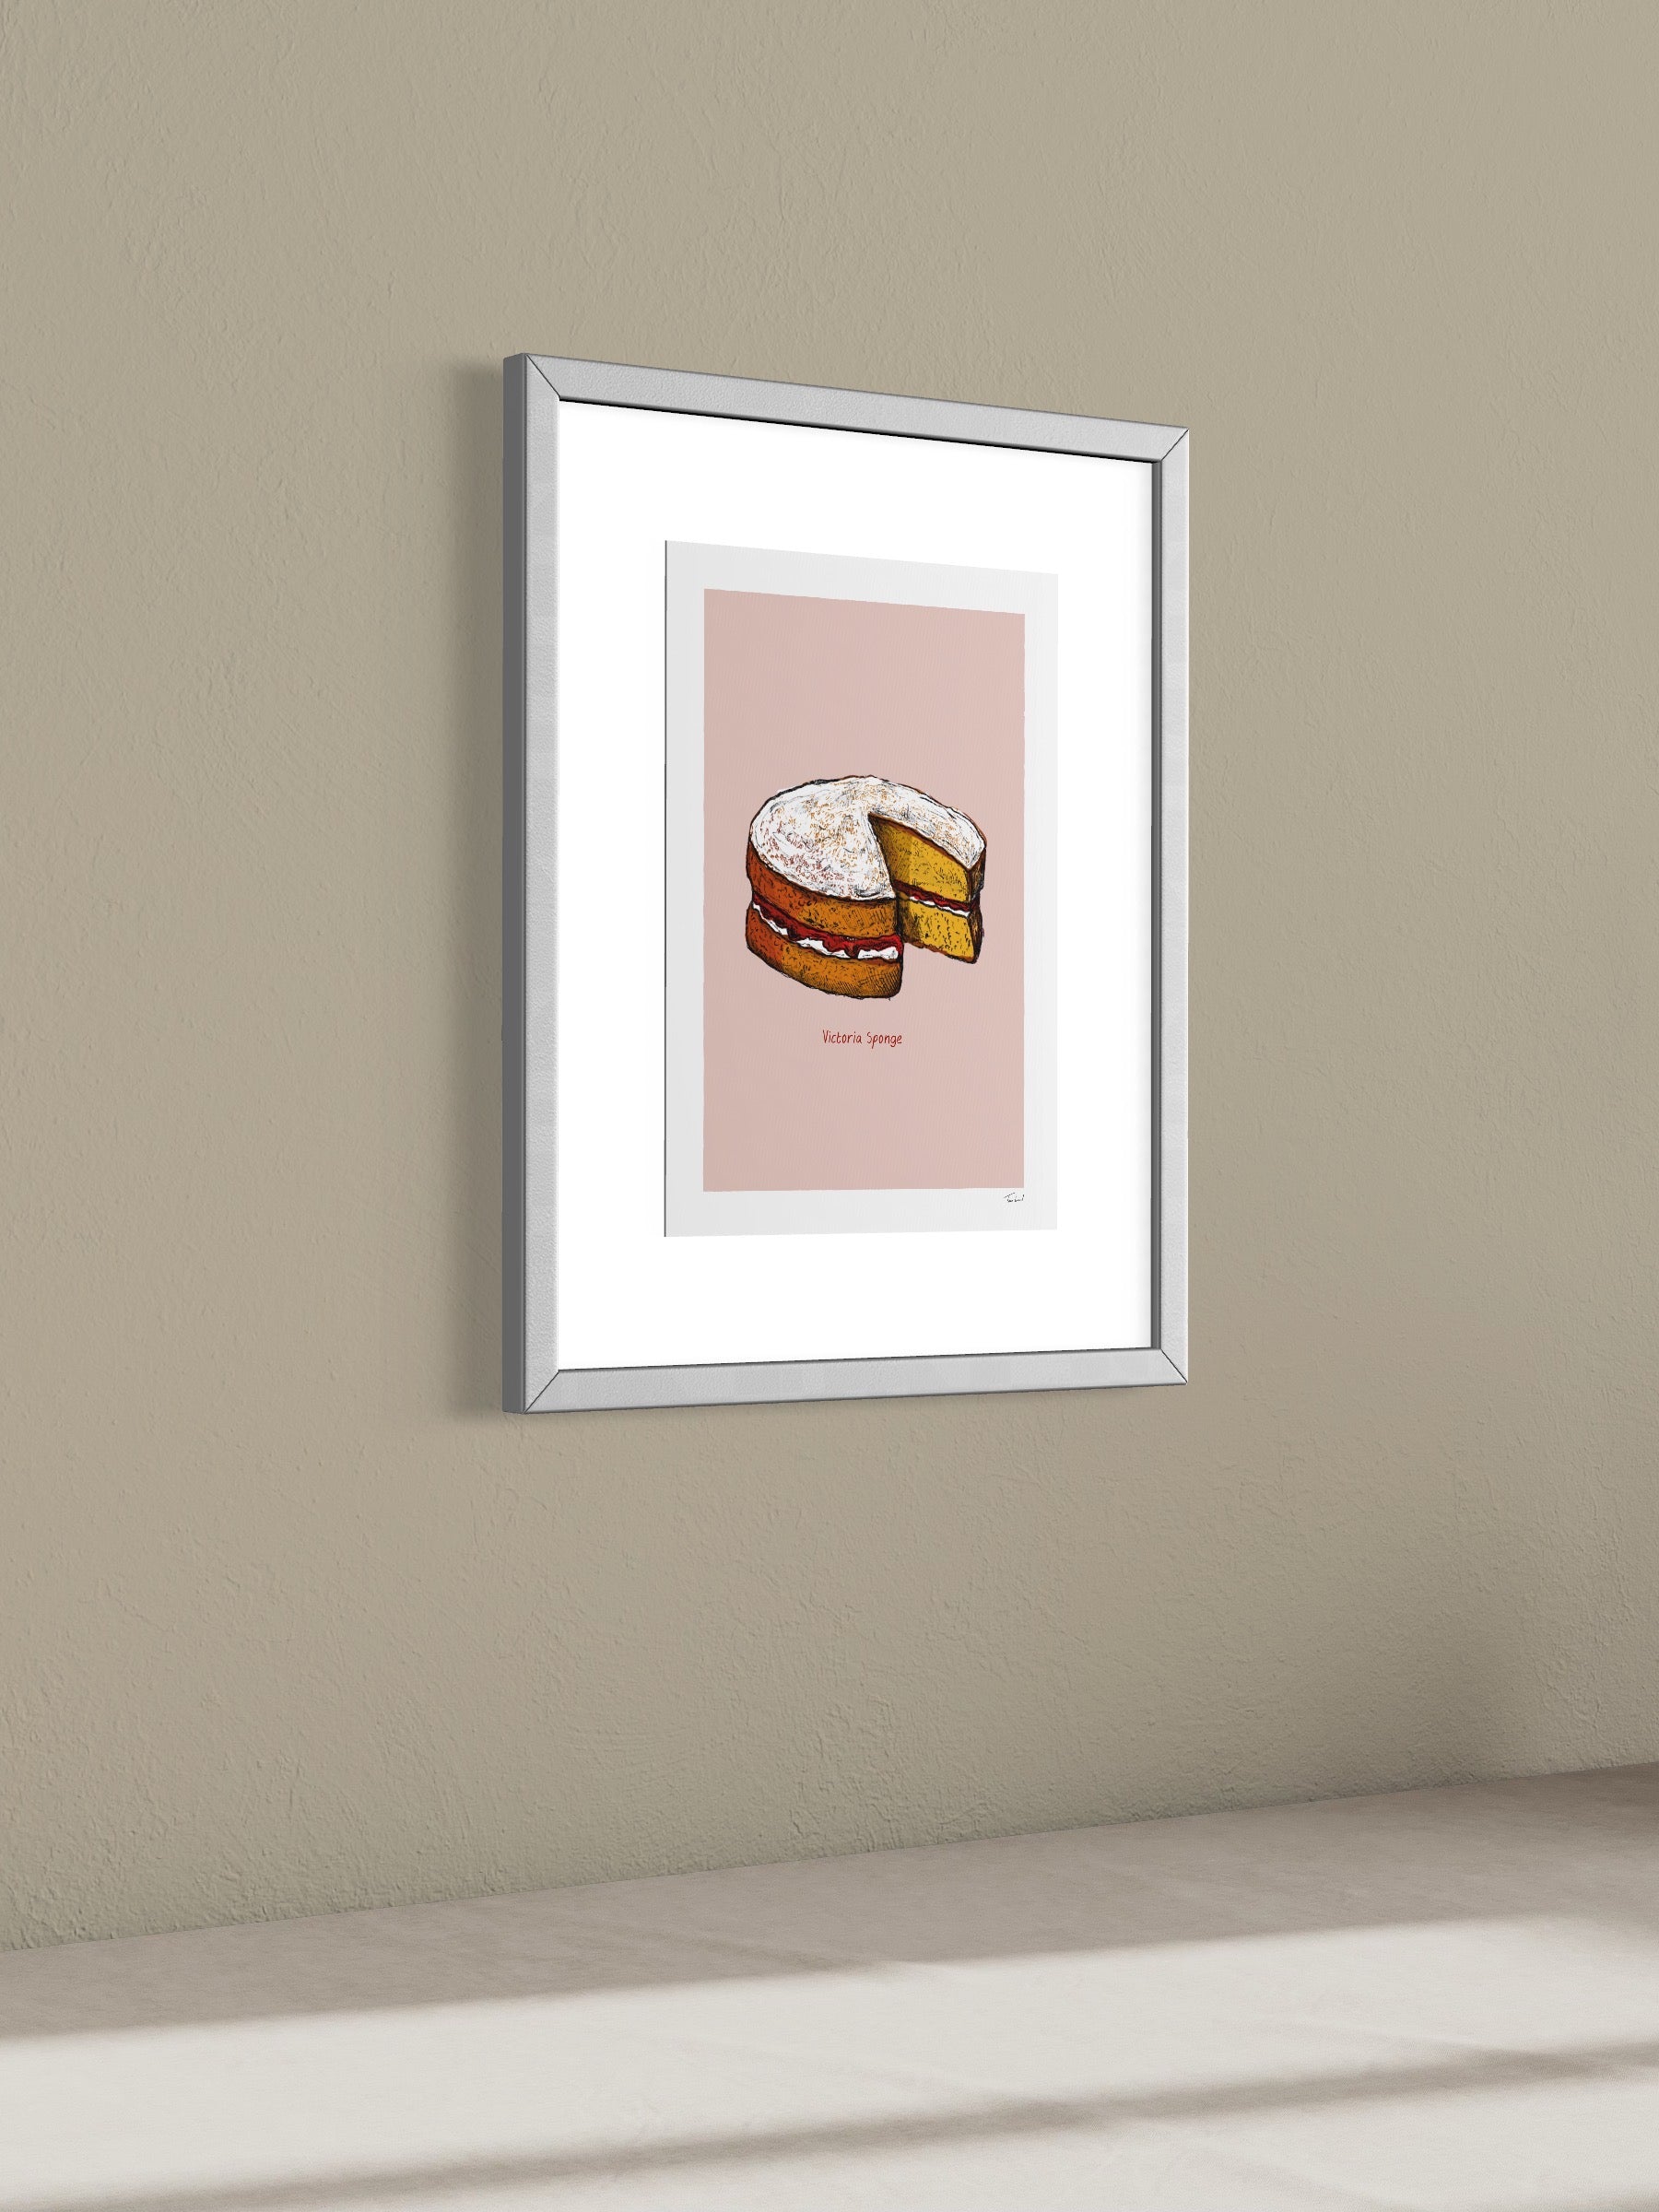 This image shows a giclee wall art print by Tom Laird Illustration of a Victoria Sponge, framed in a beautiful living room with tasteful modern home decor. This art print is available from Tom Laird Illustration in various sizes.